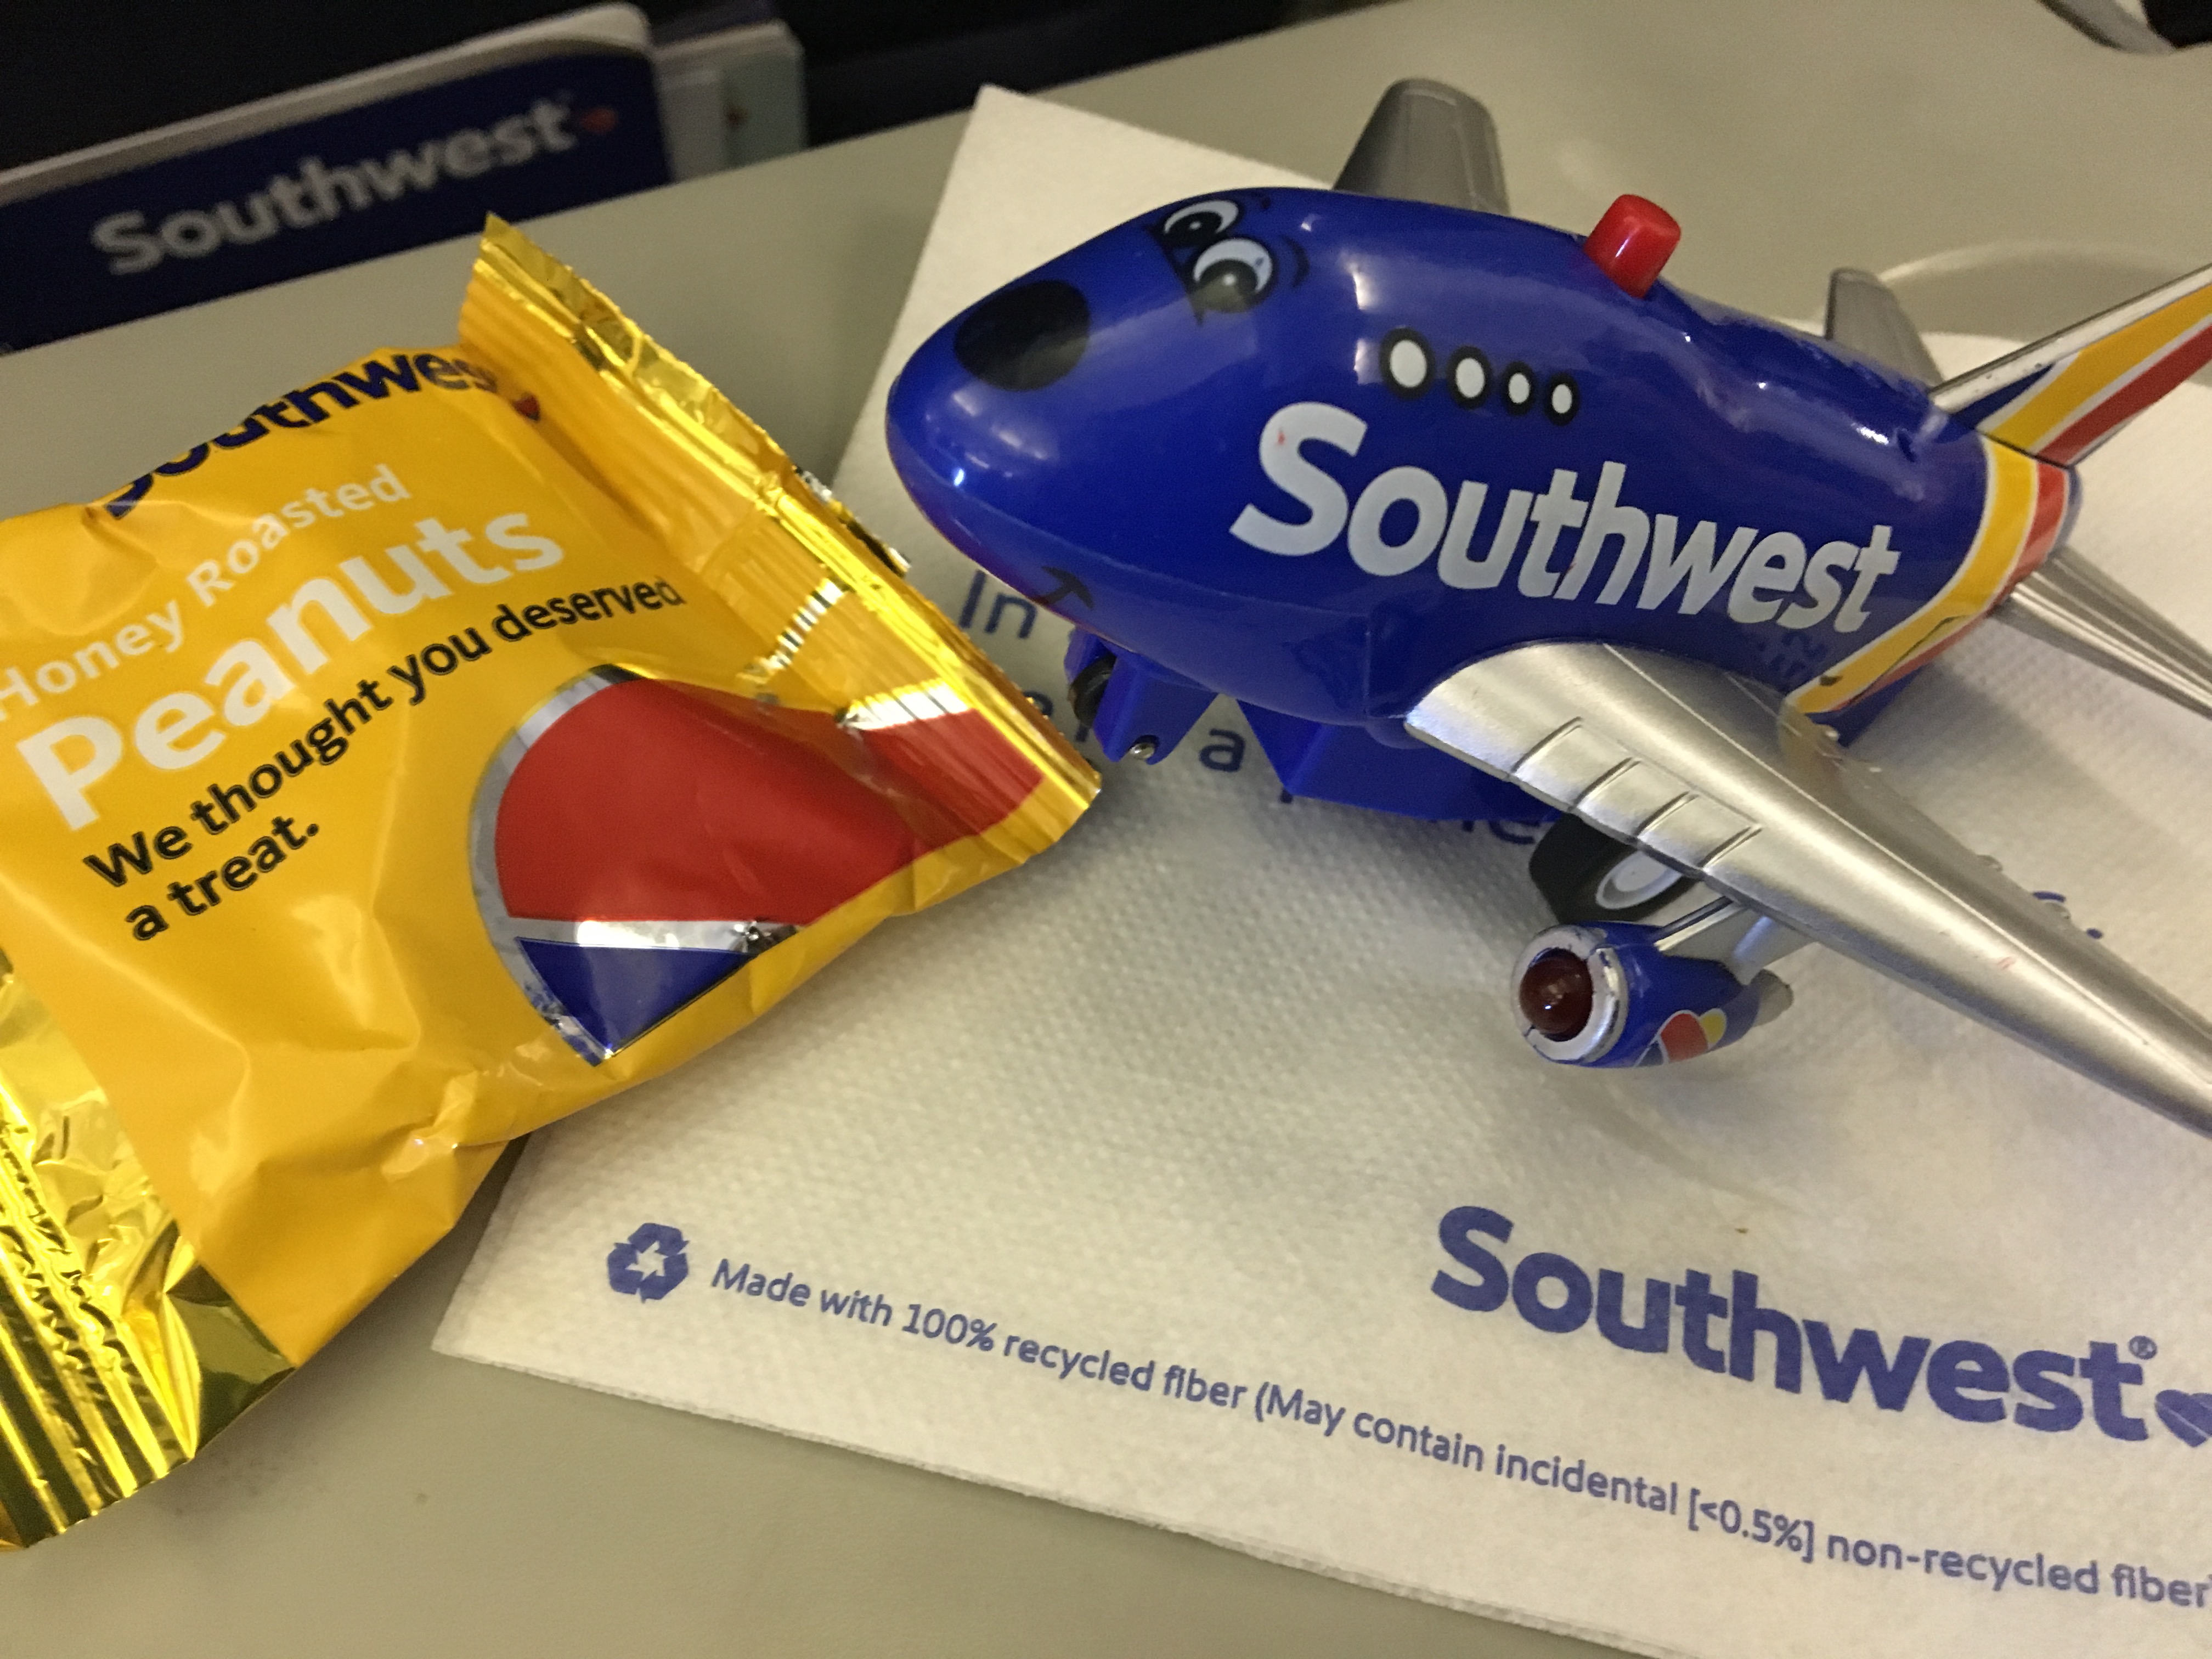 Southwest Airlines Toy Plane and Peanuts